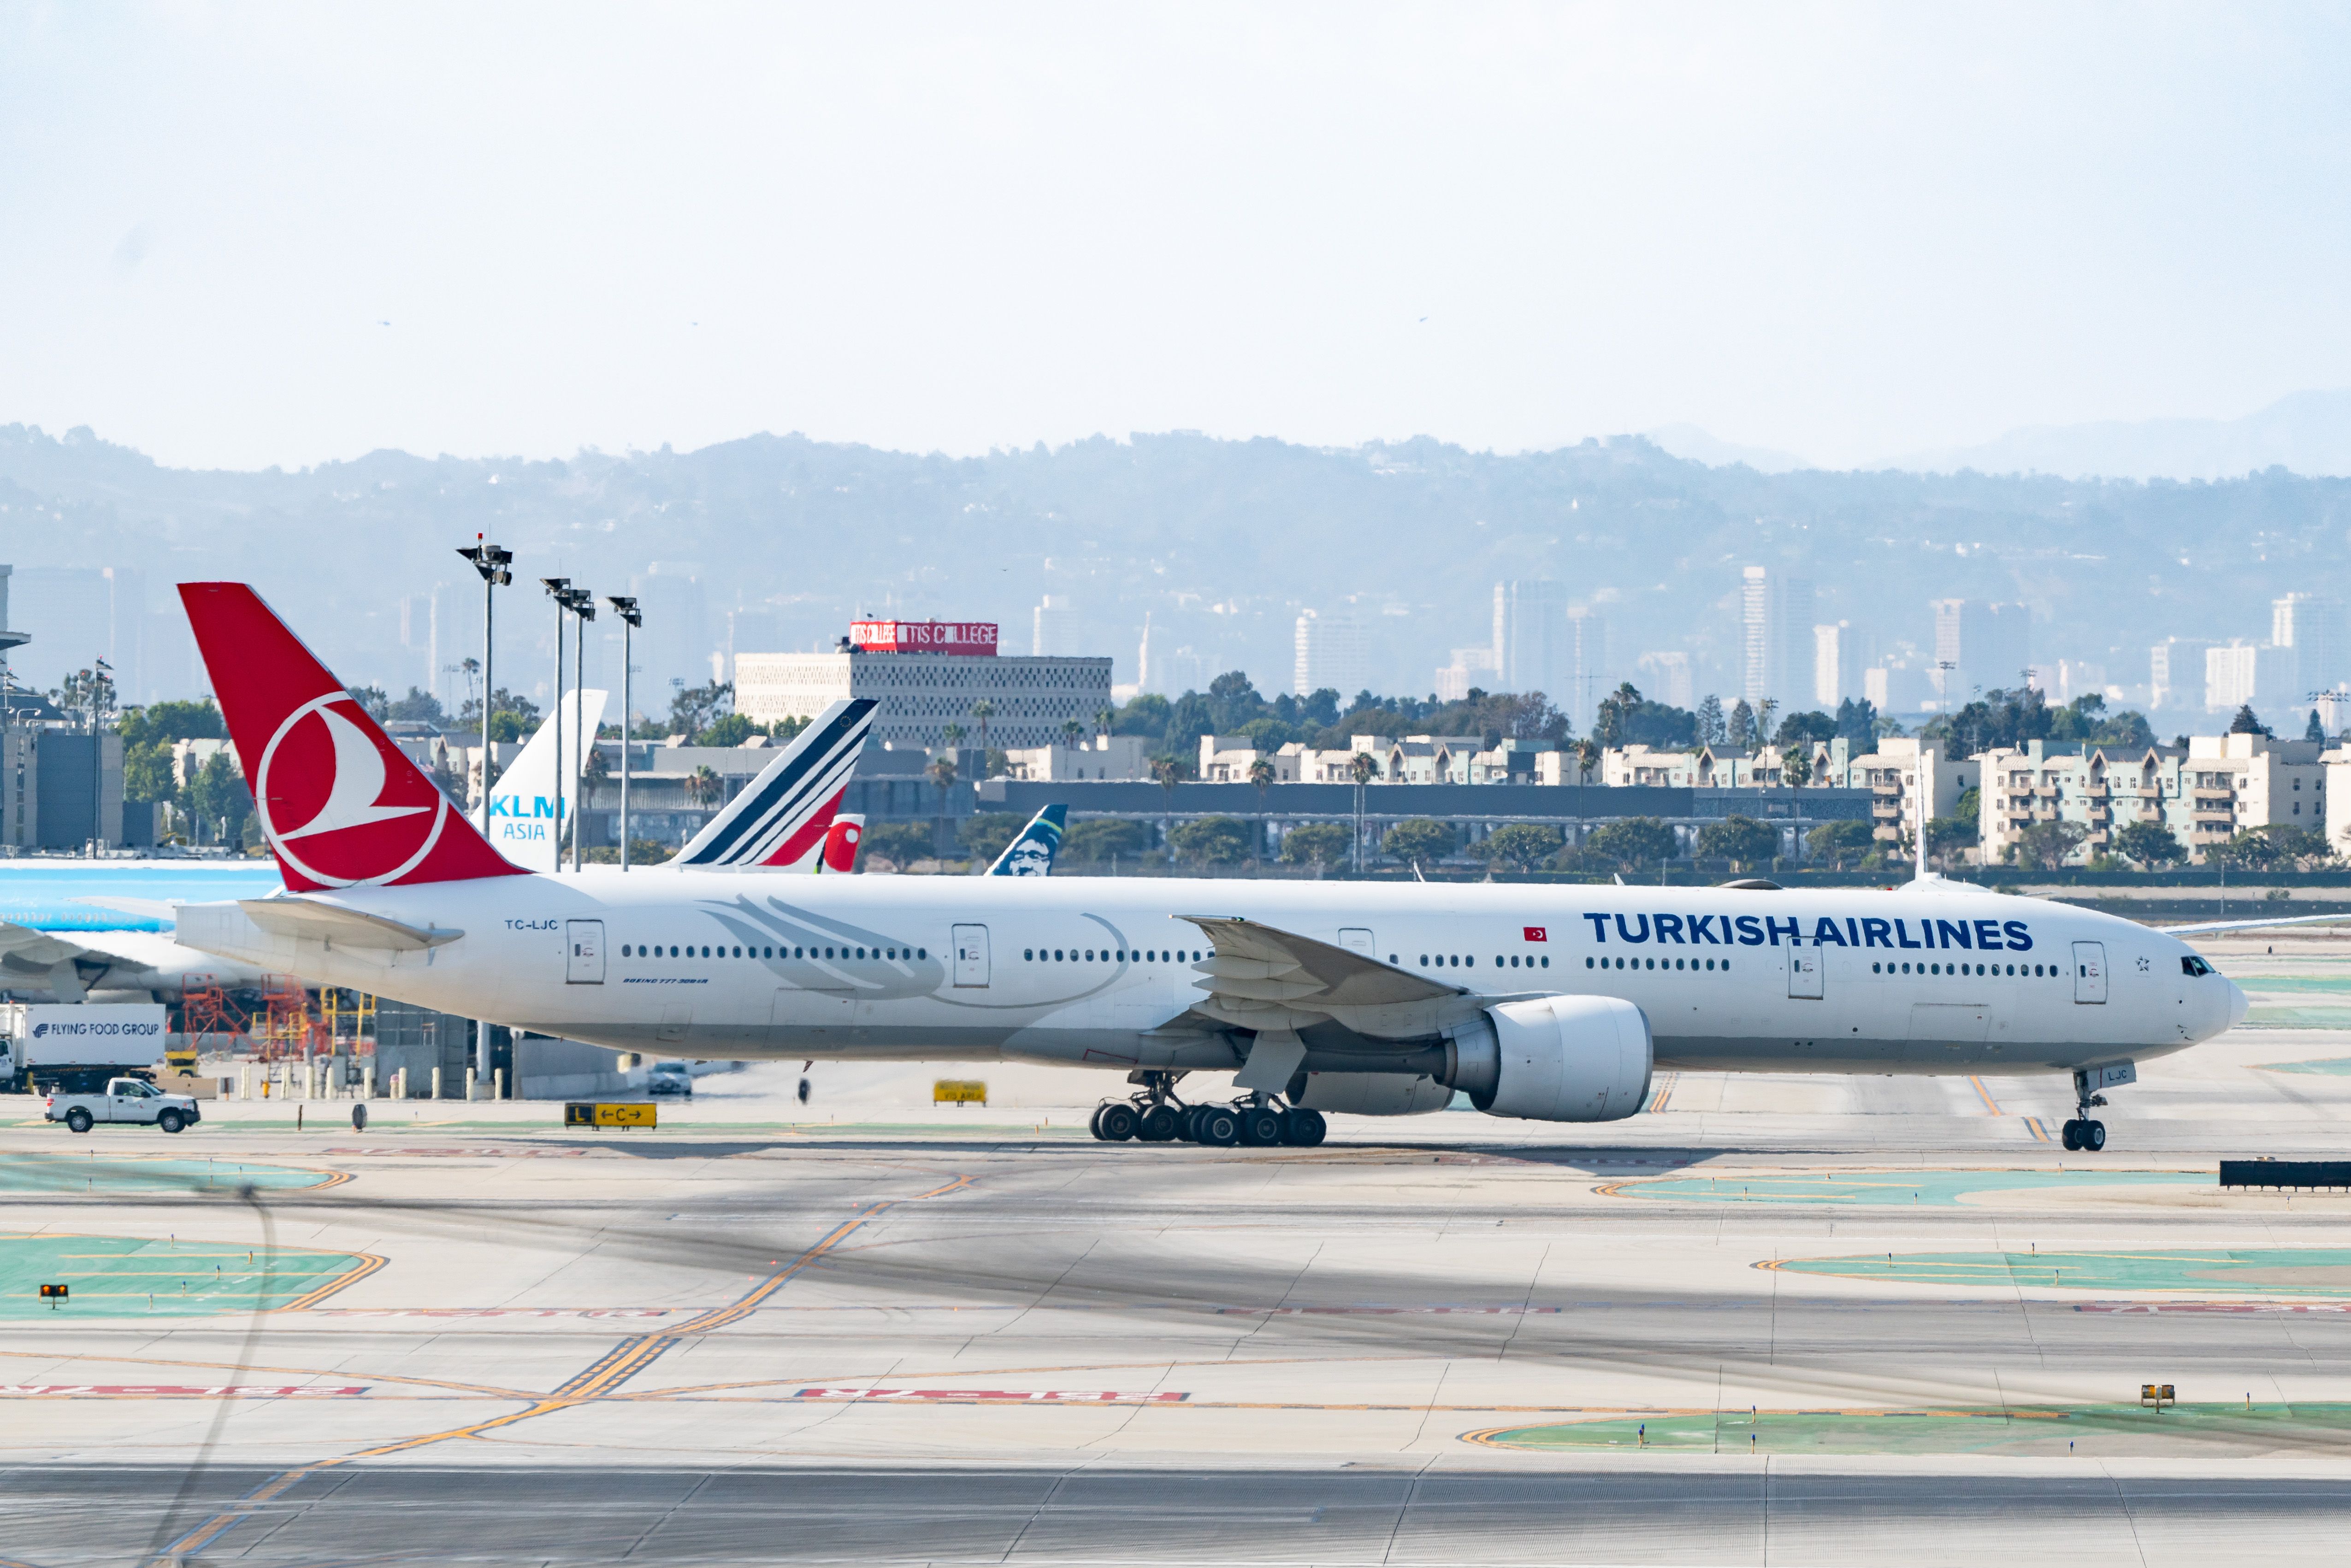 Turkish Airlines Boeing 777-300ER prepares for takeoff at Los Angeles international Airport